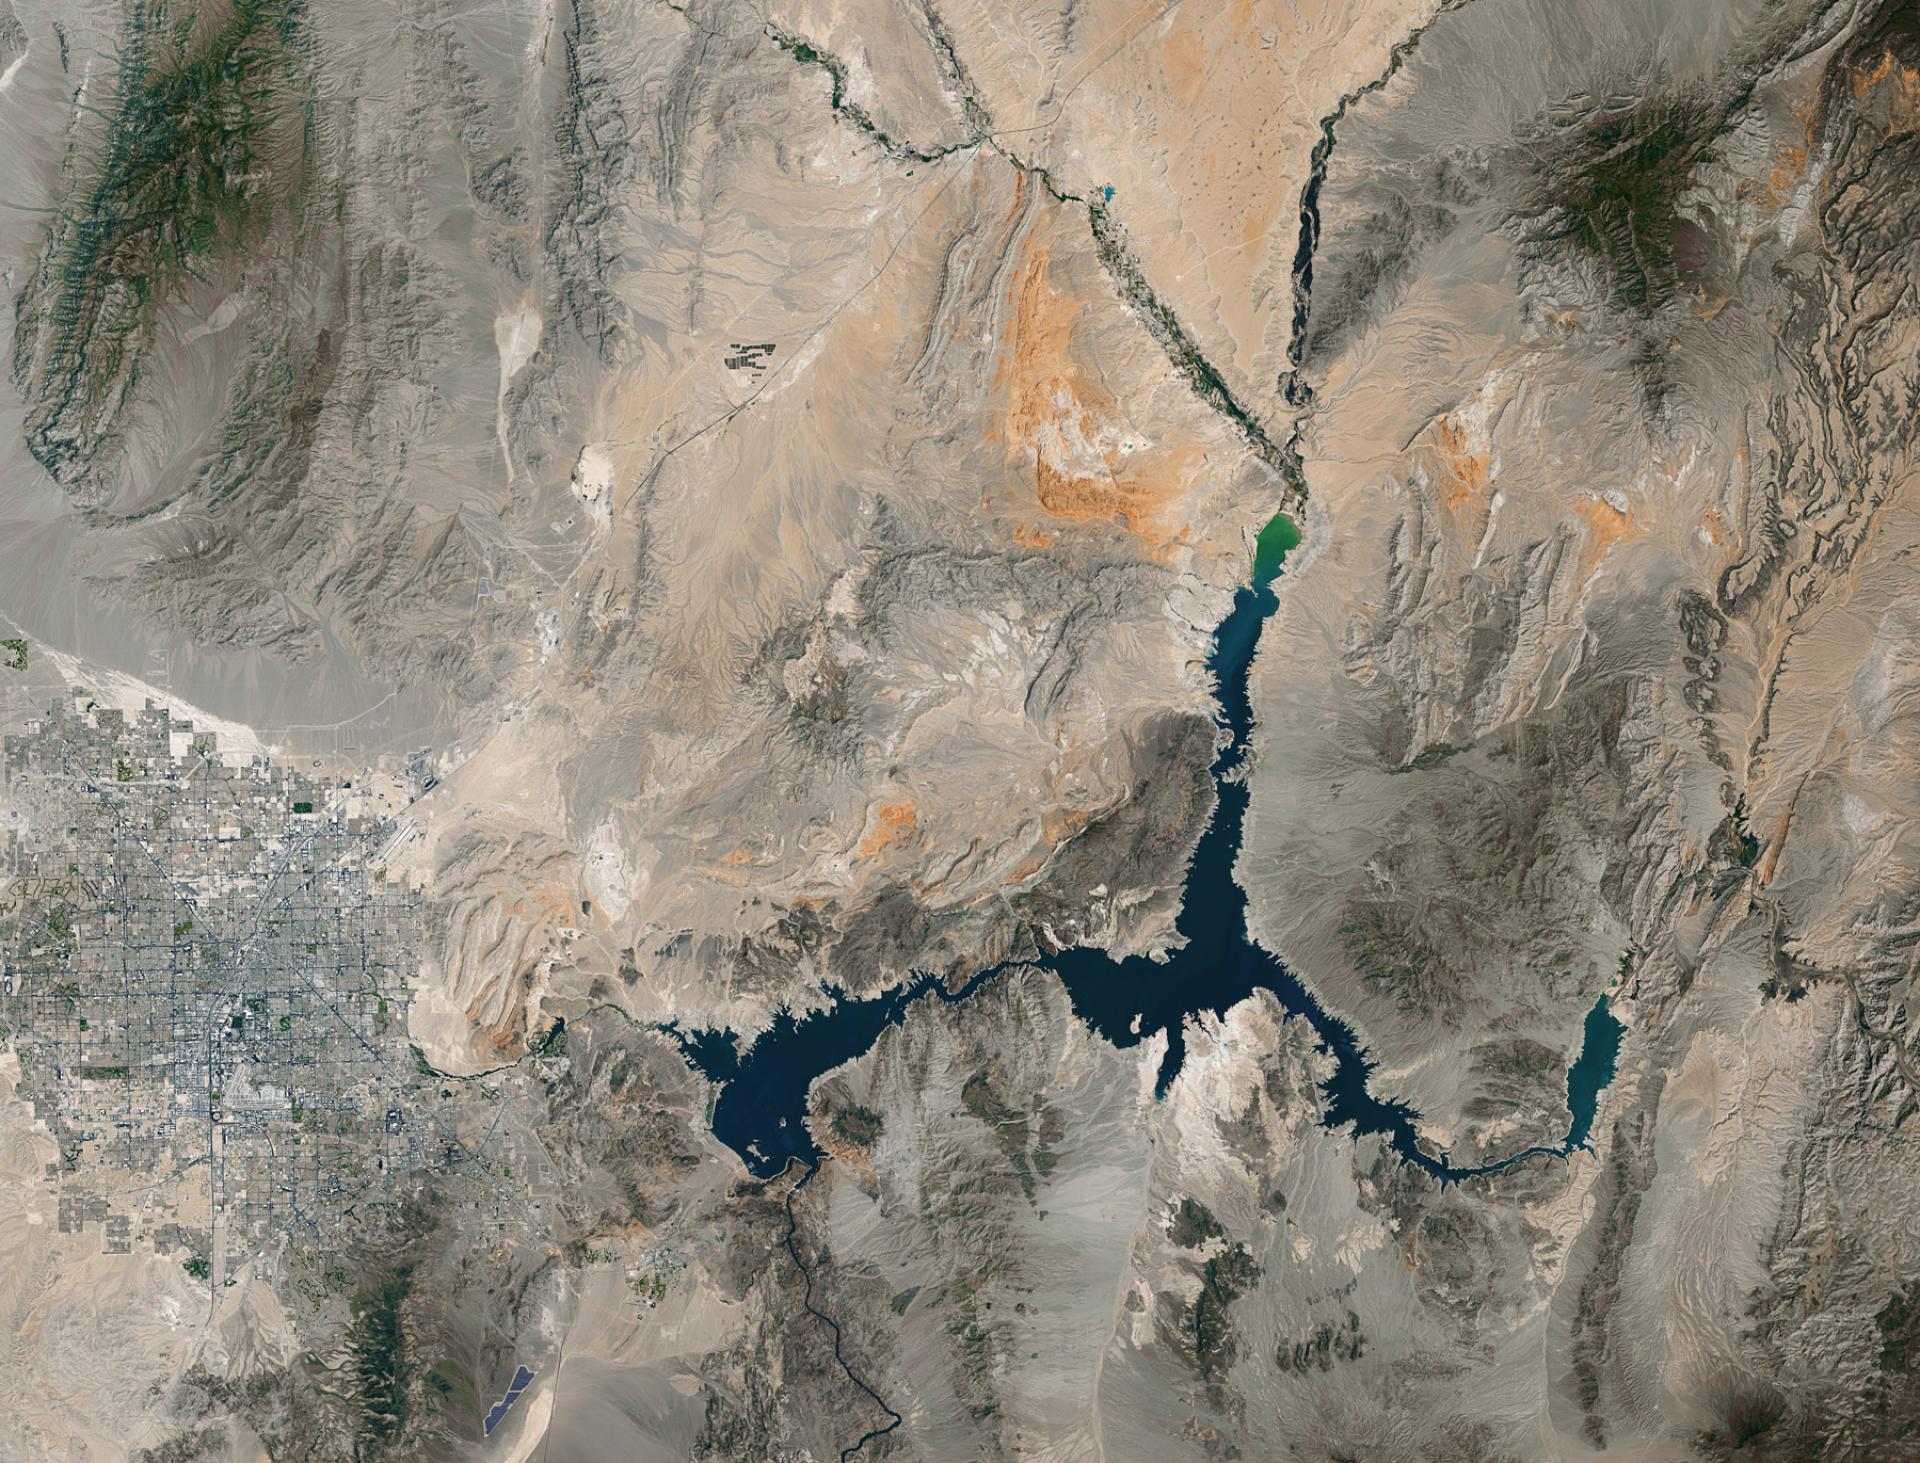 Aerial view of Lake Mead (dark blue jagged shapes) and surrounding landscape from May 23, 2016